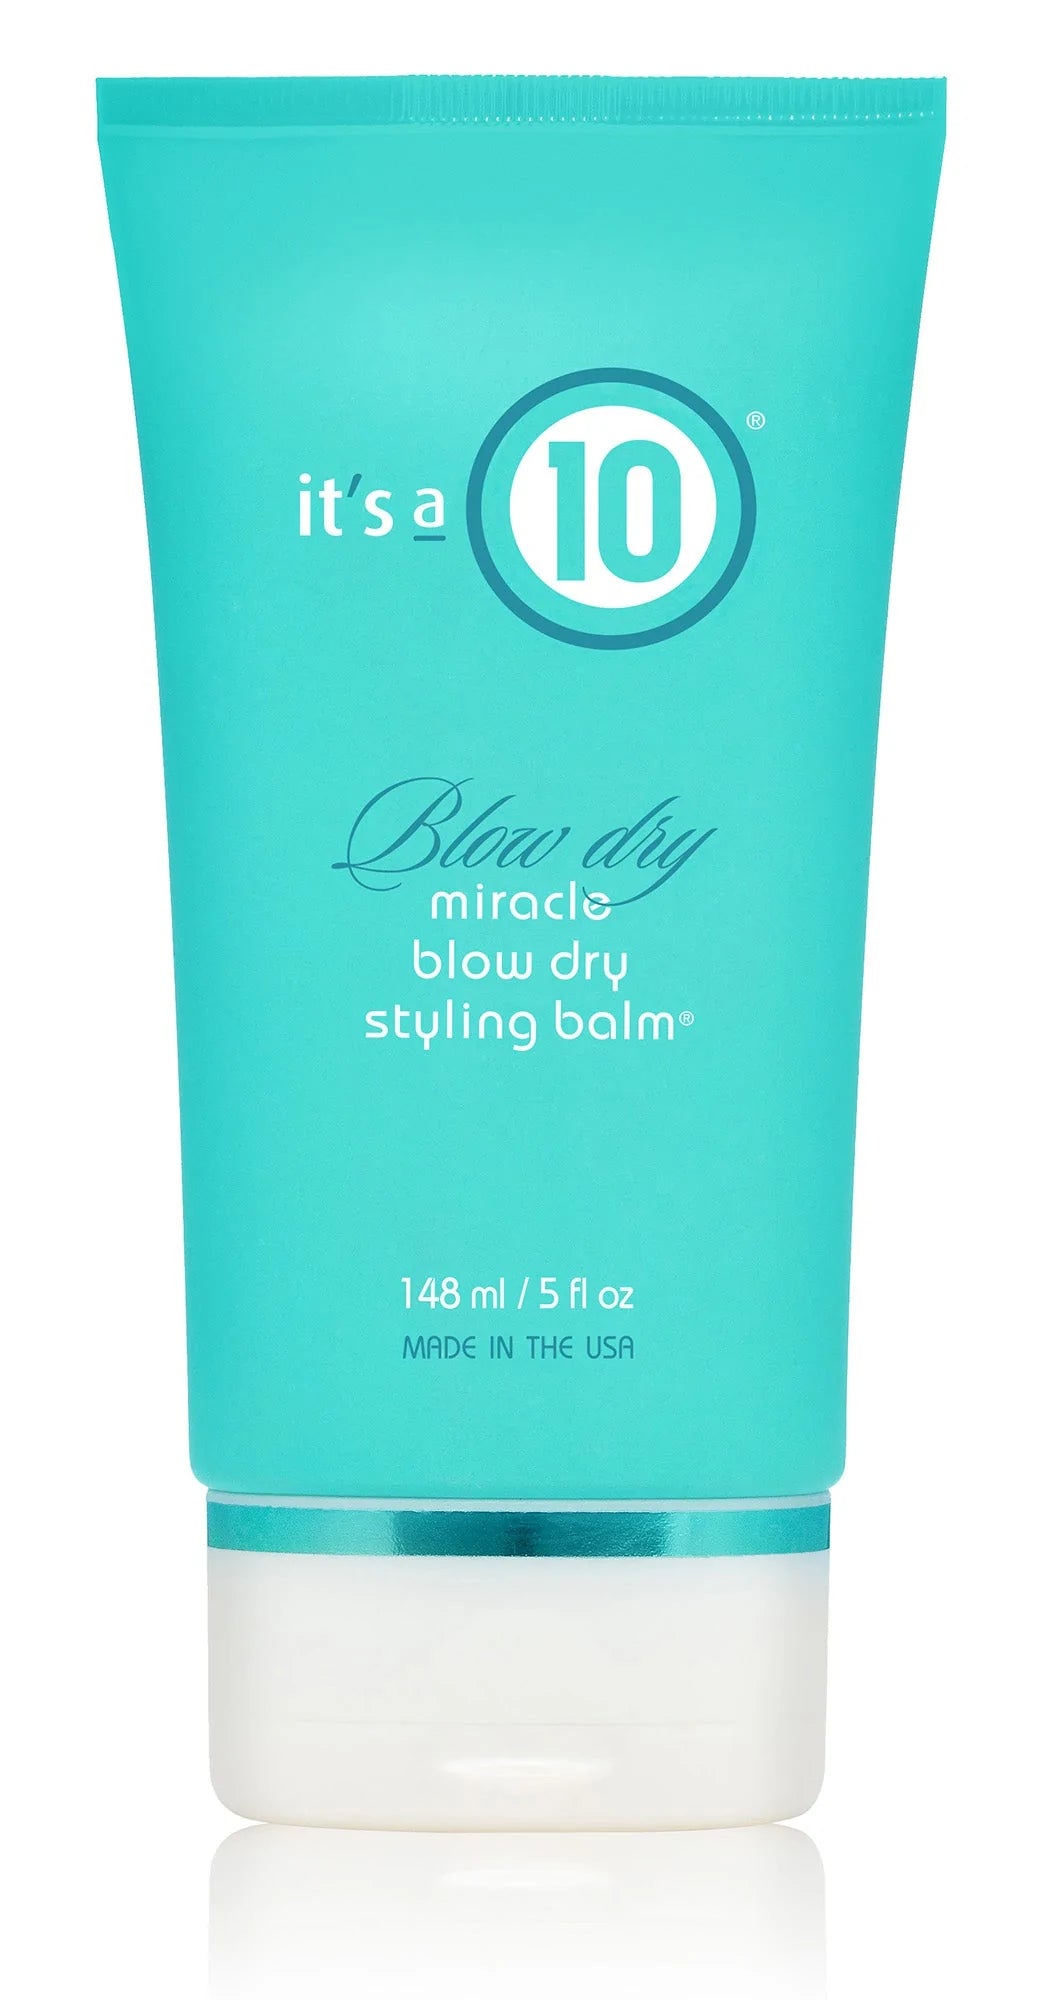 IT'S A 10 MIRACLE BLOW DRY STYLING BALM